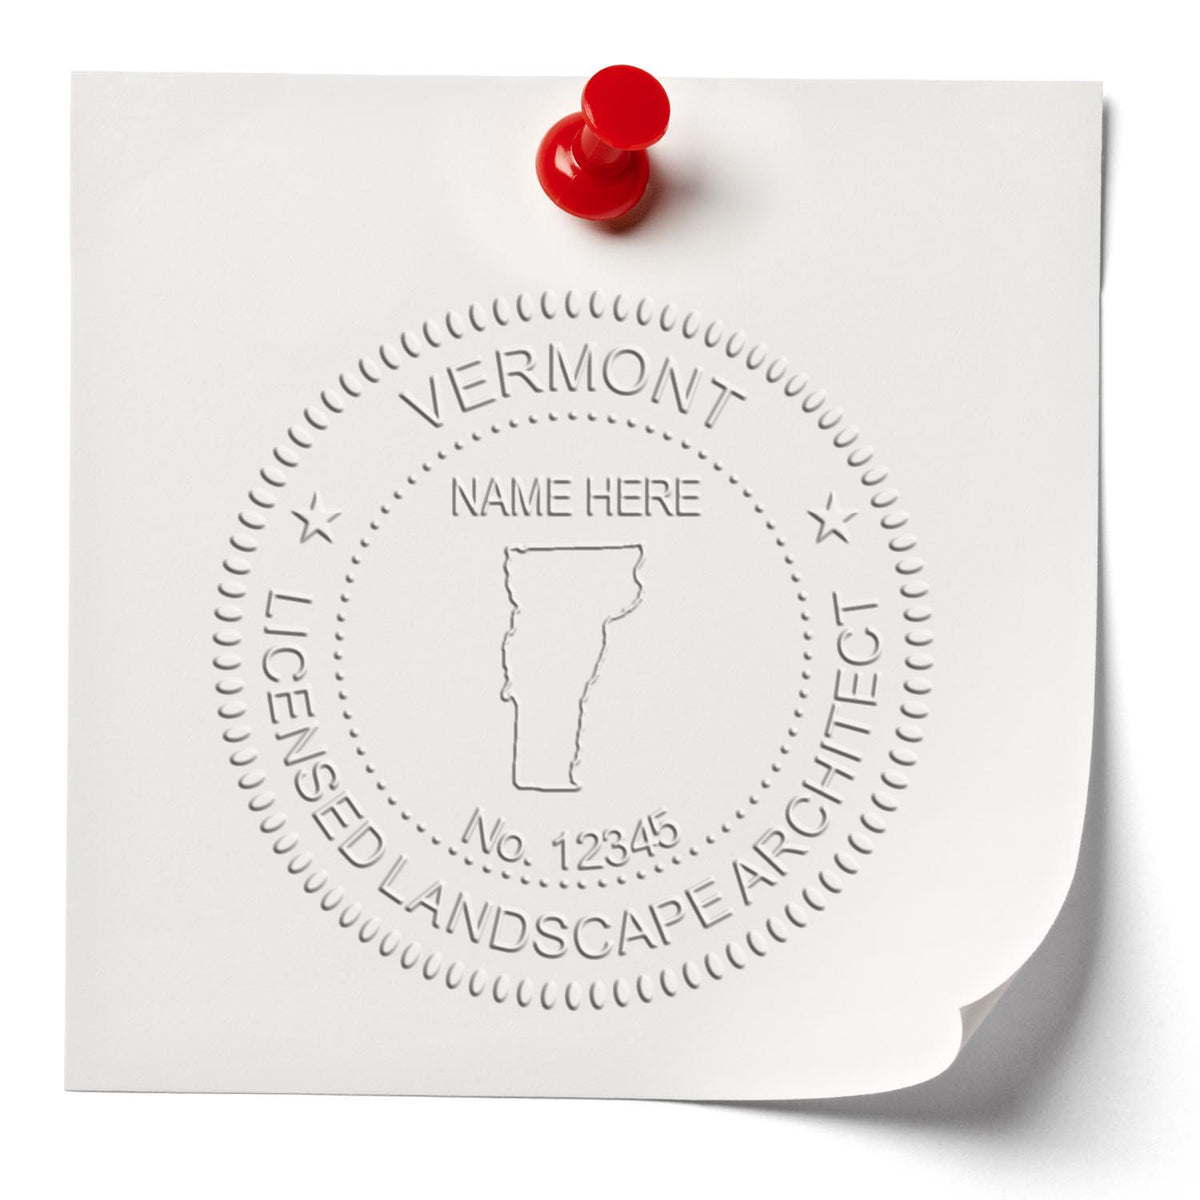 A photograph of the Hybrid Vermont Landscape Architect Seal stamp impression reveals a vivid, professional image of the on paper.